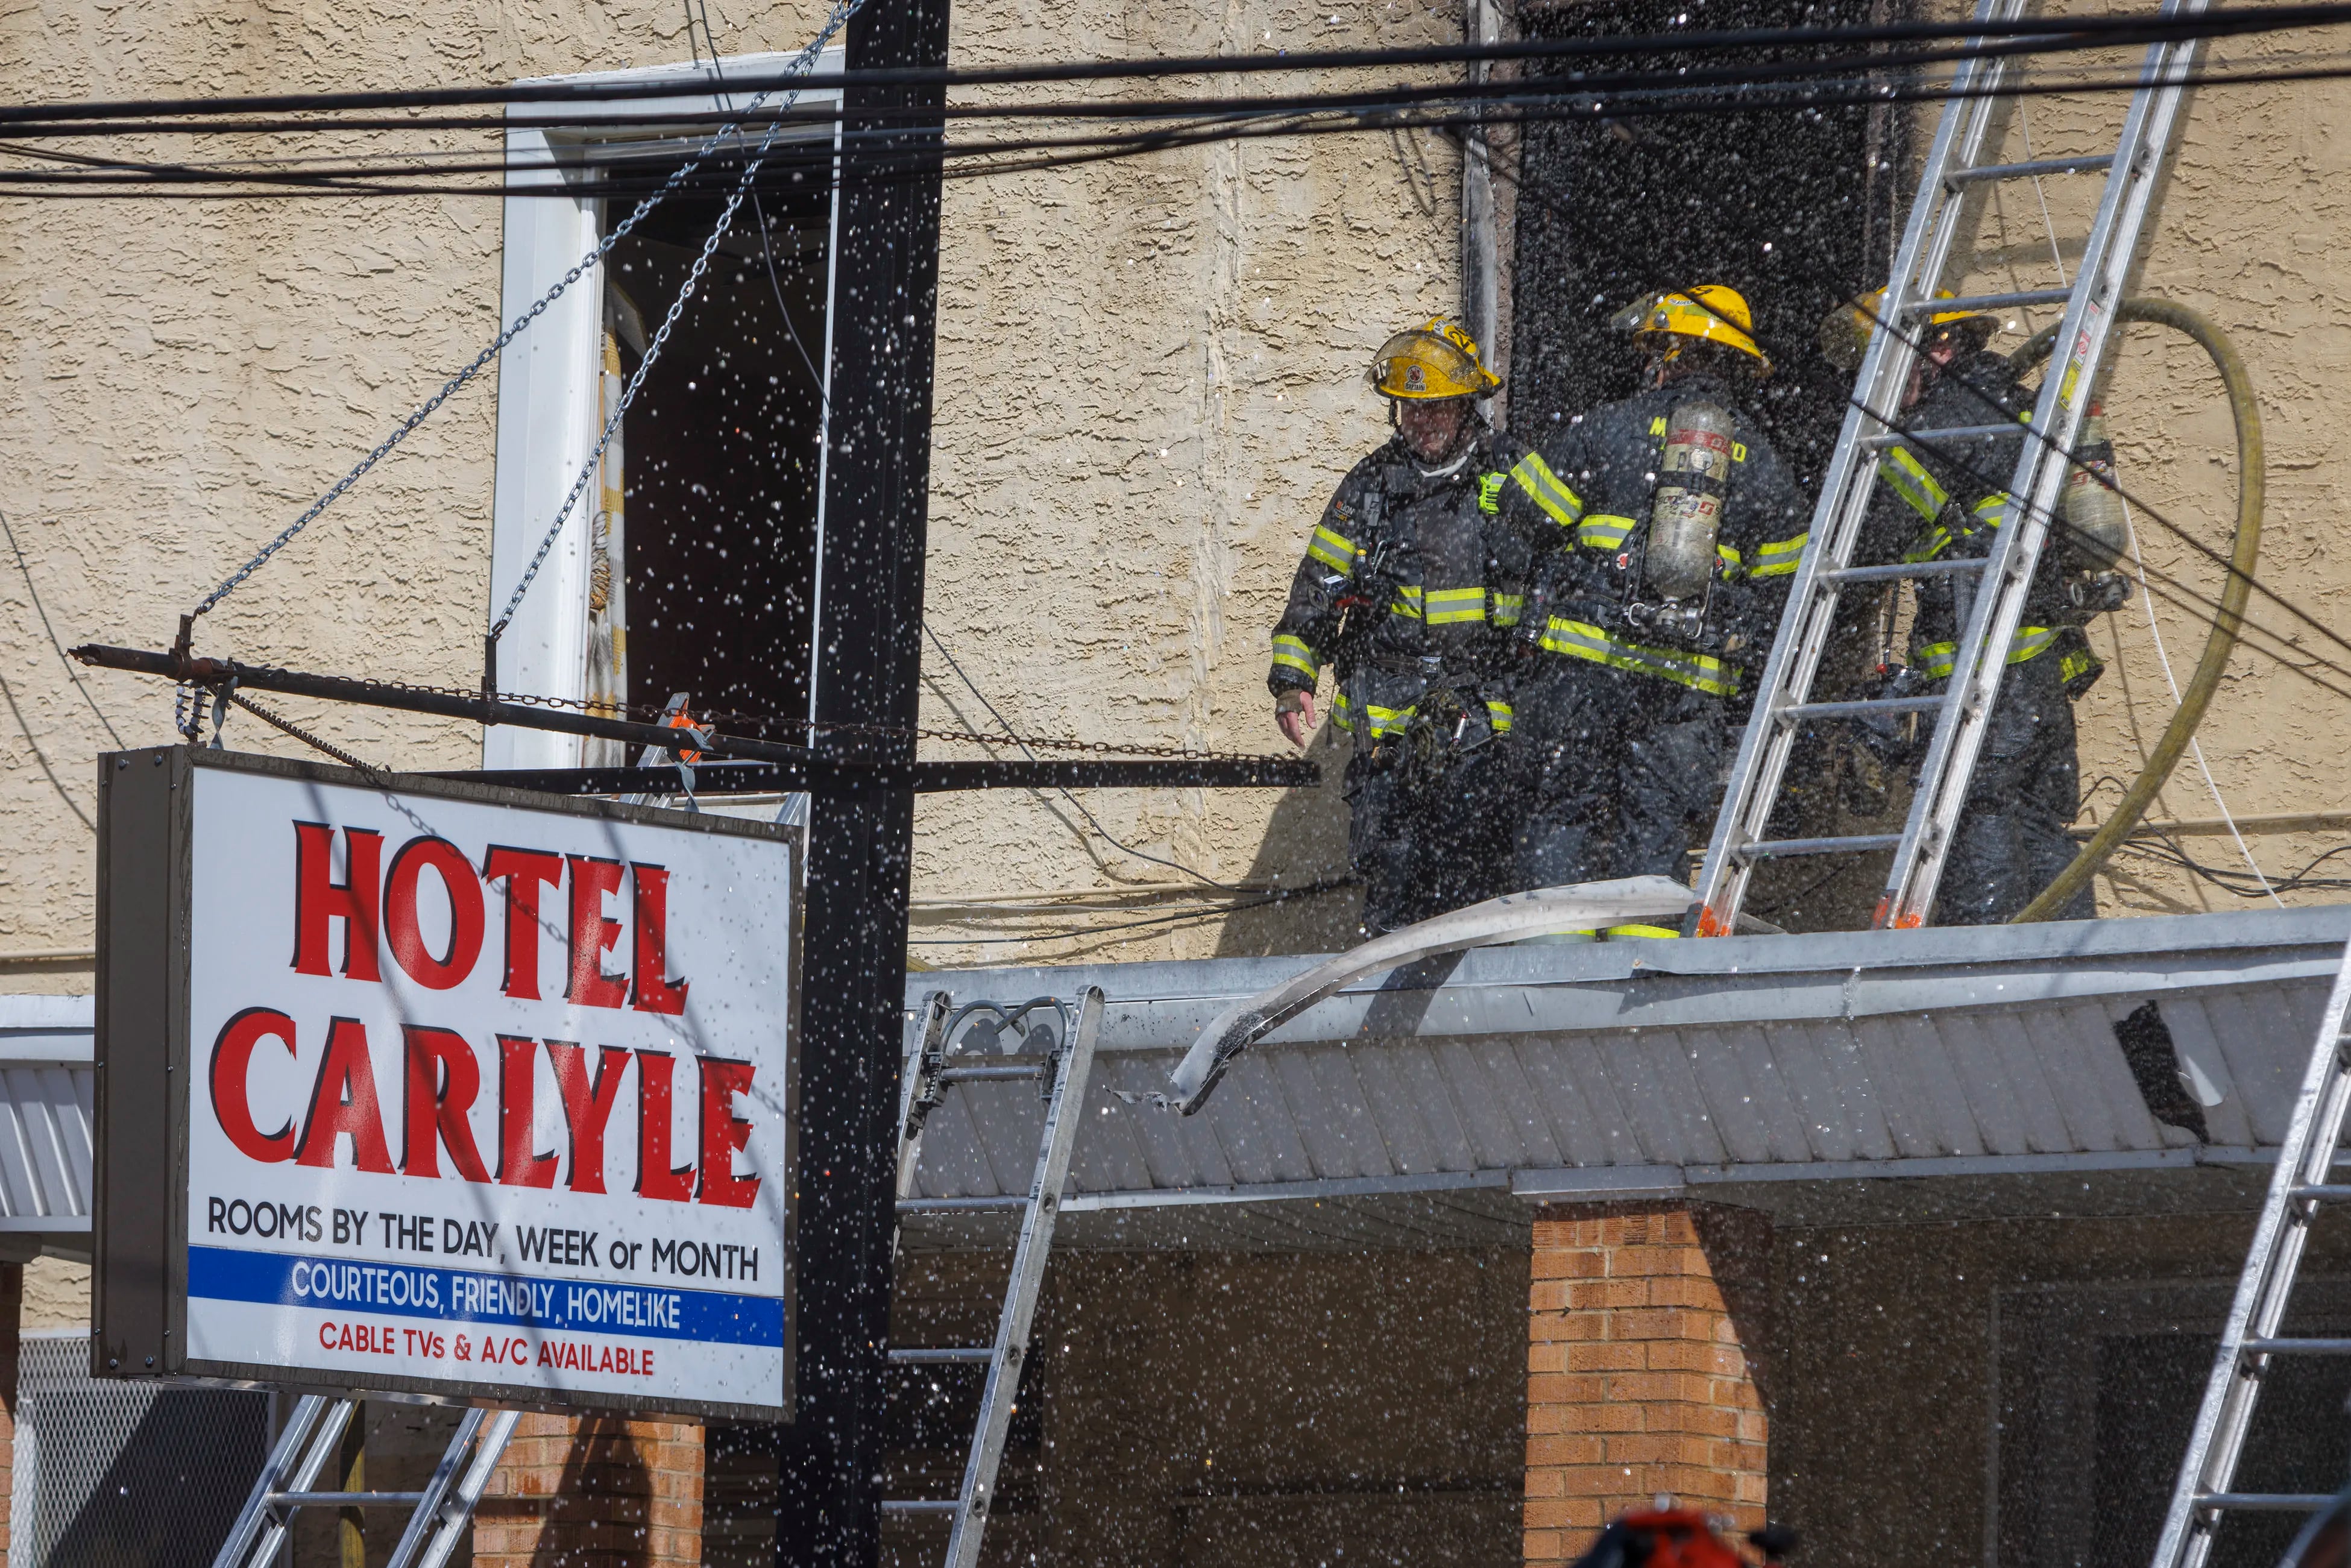 The blaze burned through the second and third floors of Hotel Carlyle in North Philadelphia on Wednesday.